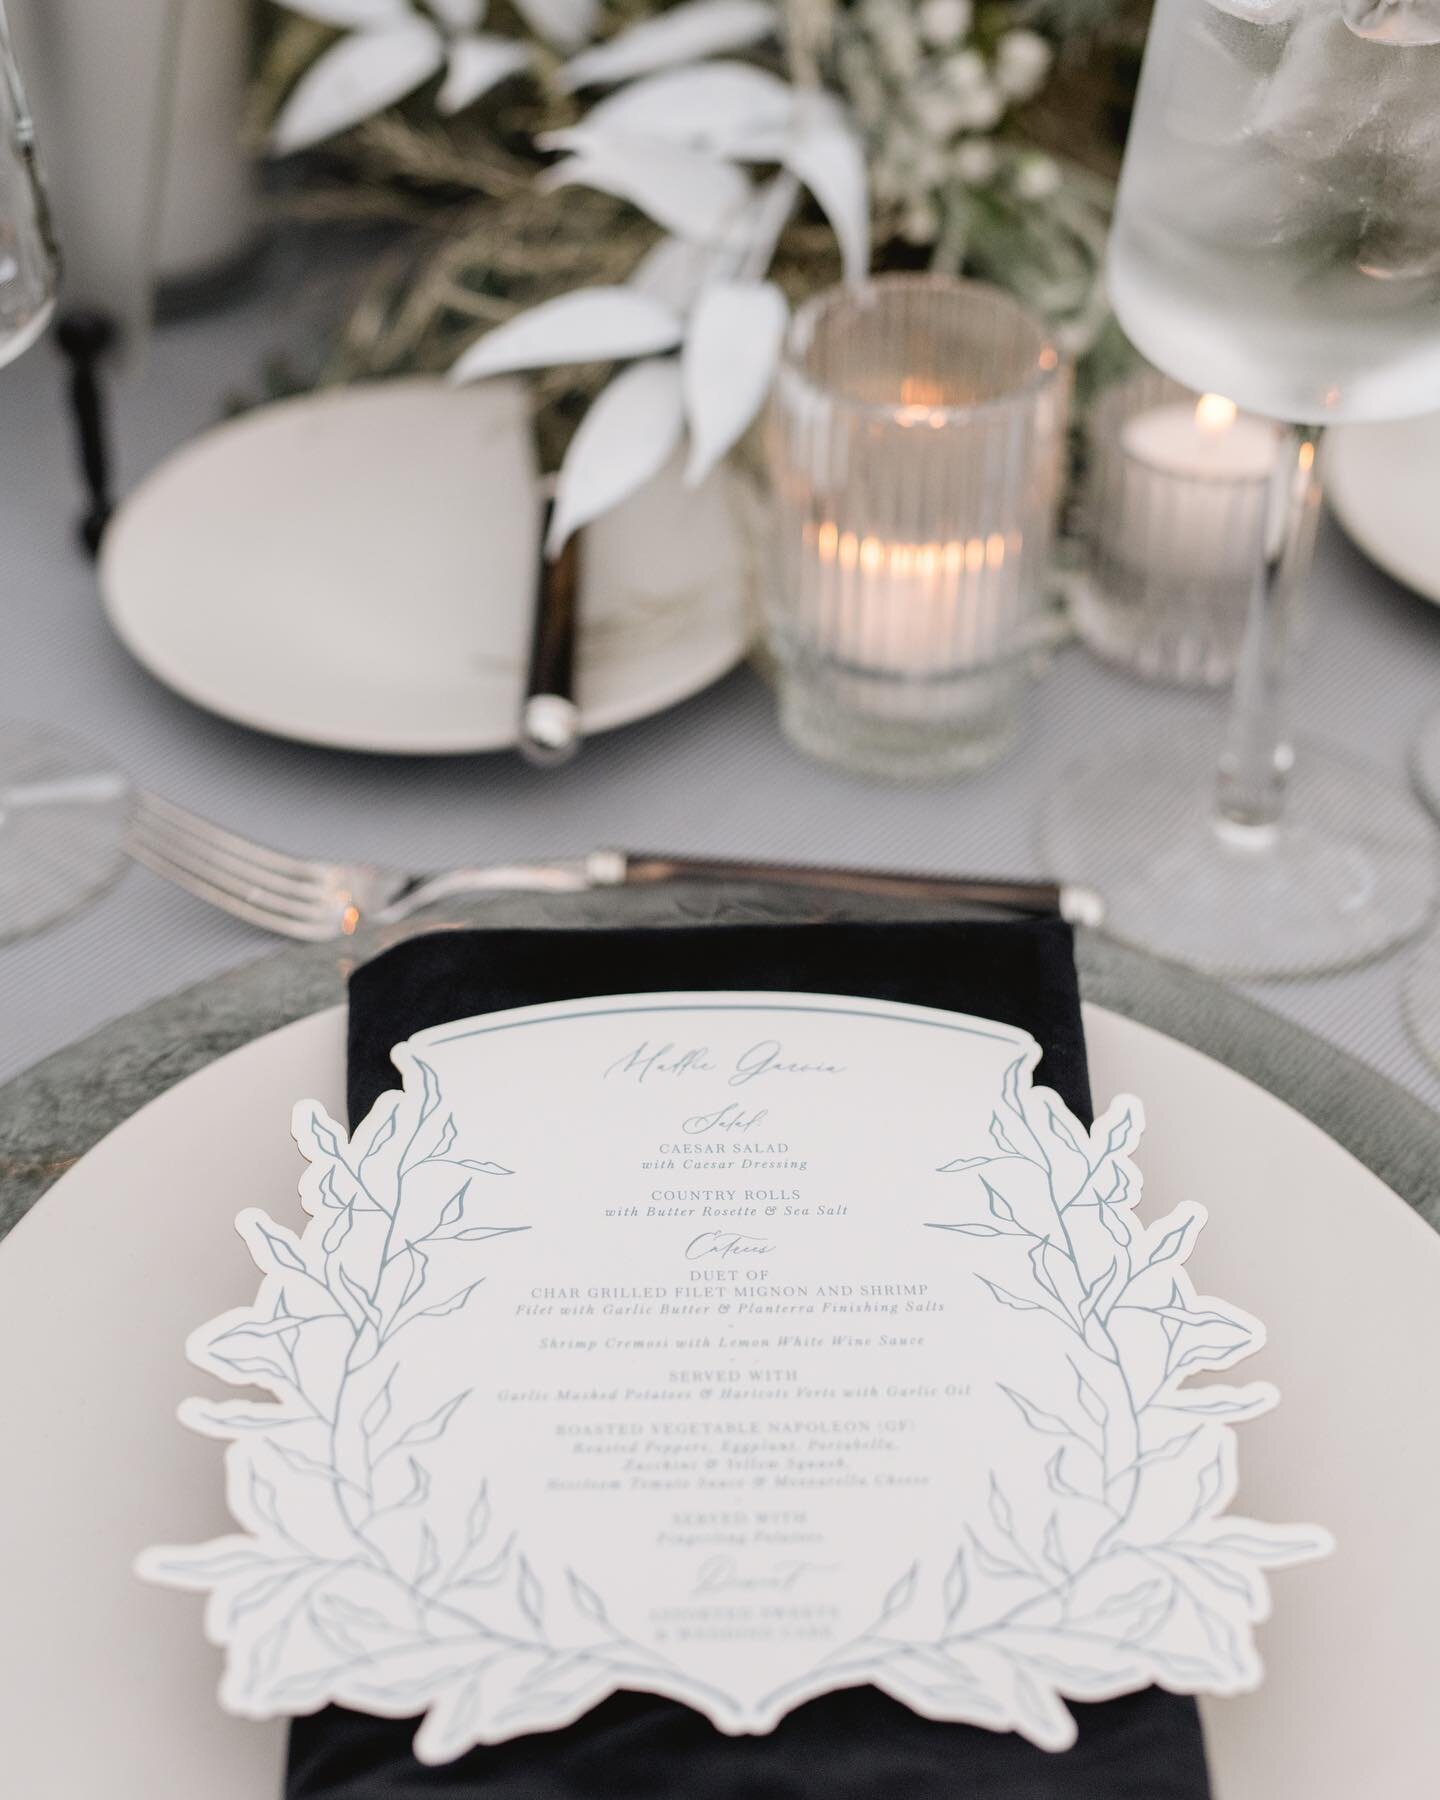 The die-cut menu of DREAMS for A &amp; G&rsquo;s winter wedding. We wanted the whole day to feel like winter, without being overtly winter themed. 
.
.
.
We designed a &ldquo;snowy day&rdquo; inspired place setting with grey pinstripe custom linens, 